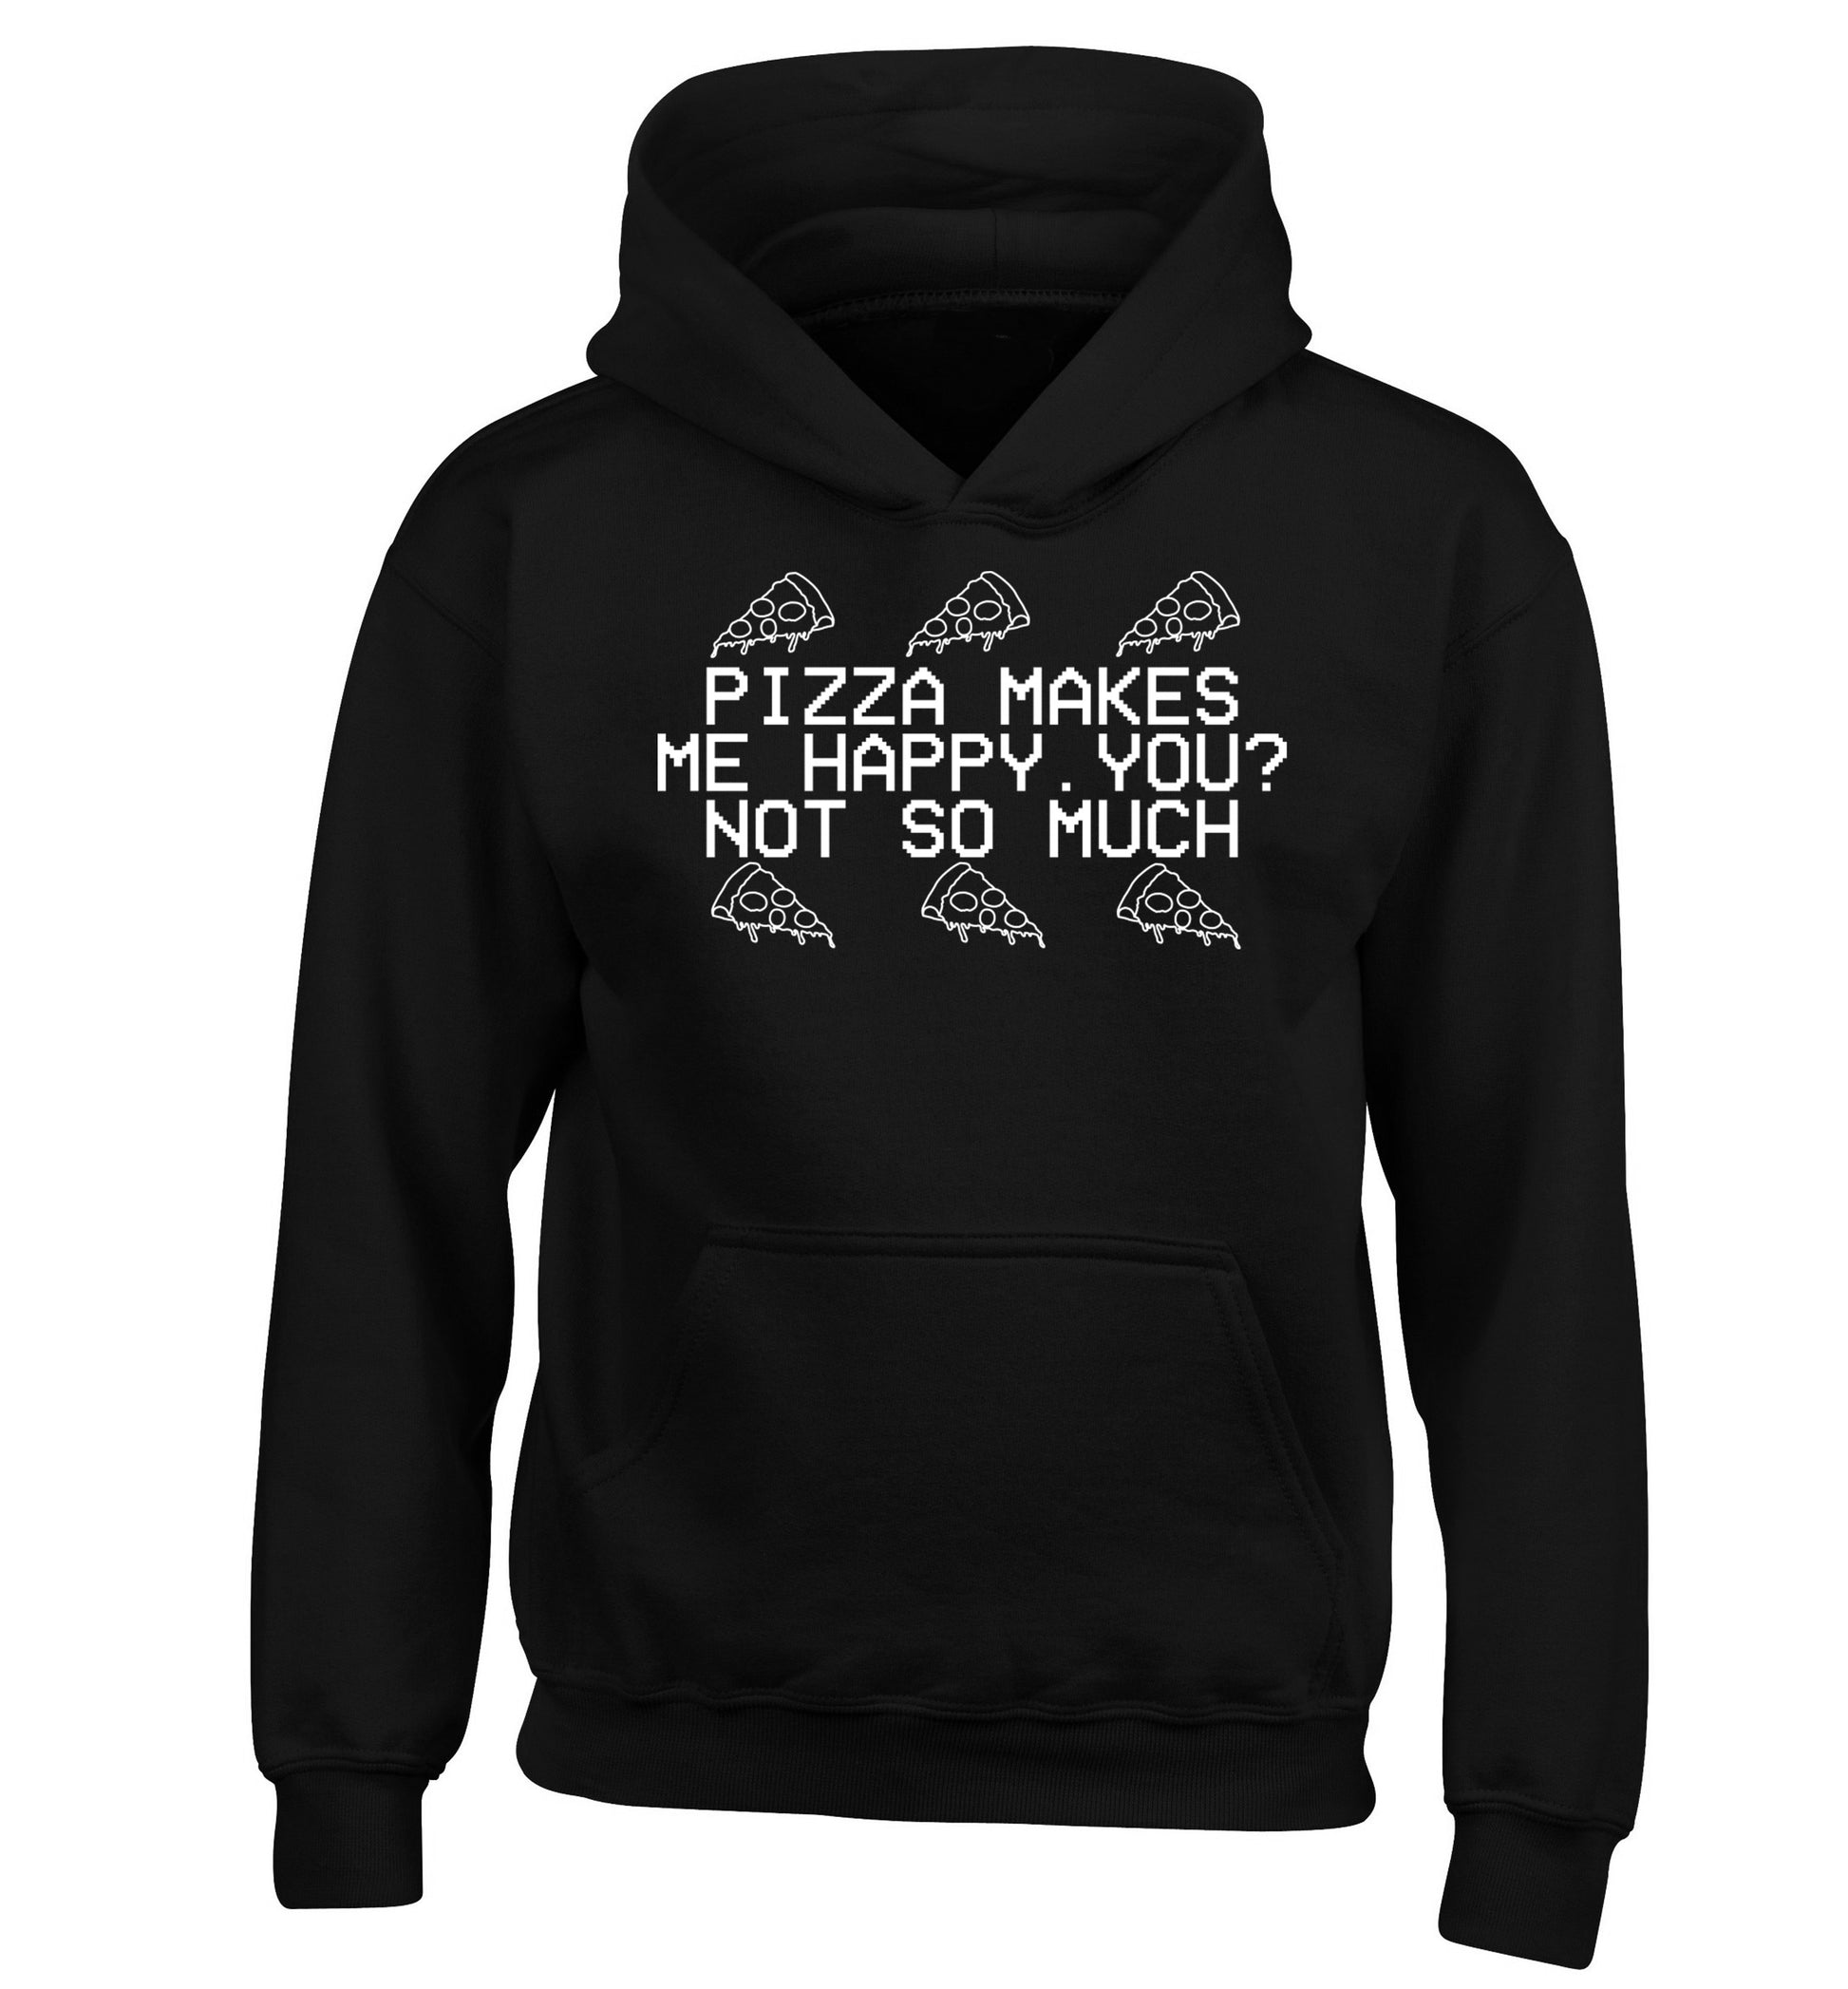 Pizza makes me happy, You? Not so much children's black hoodie 12-14 Years